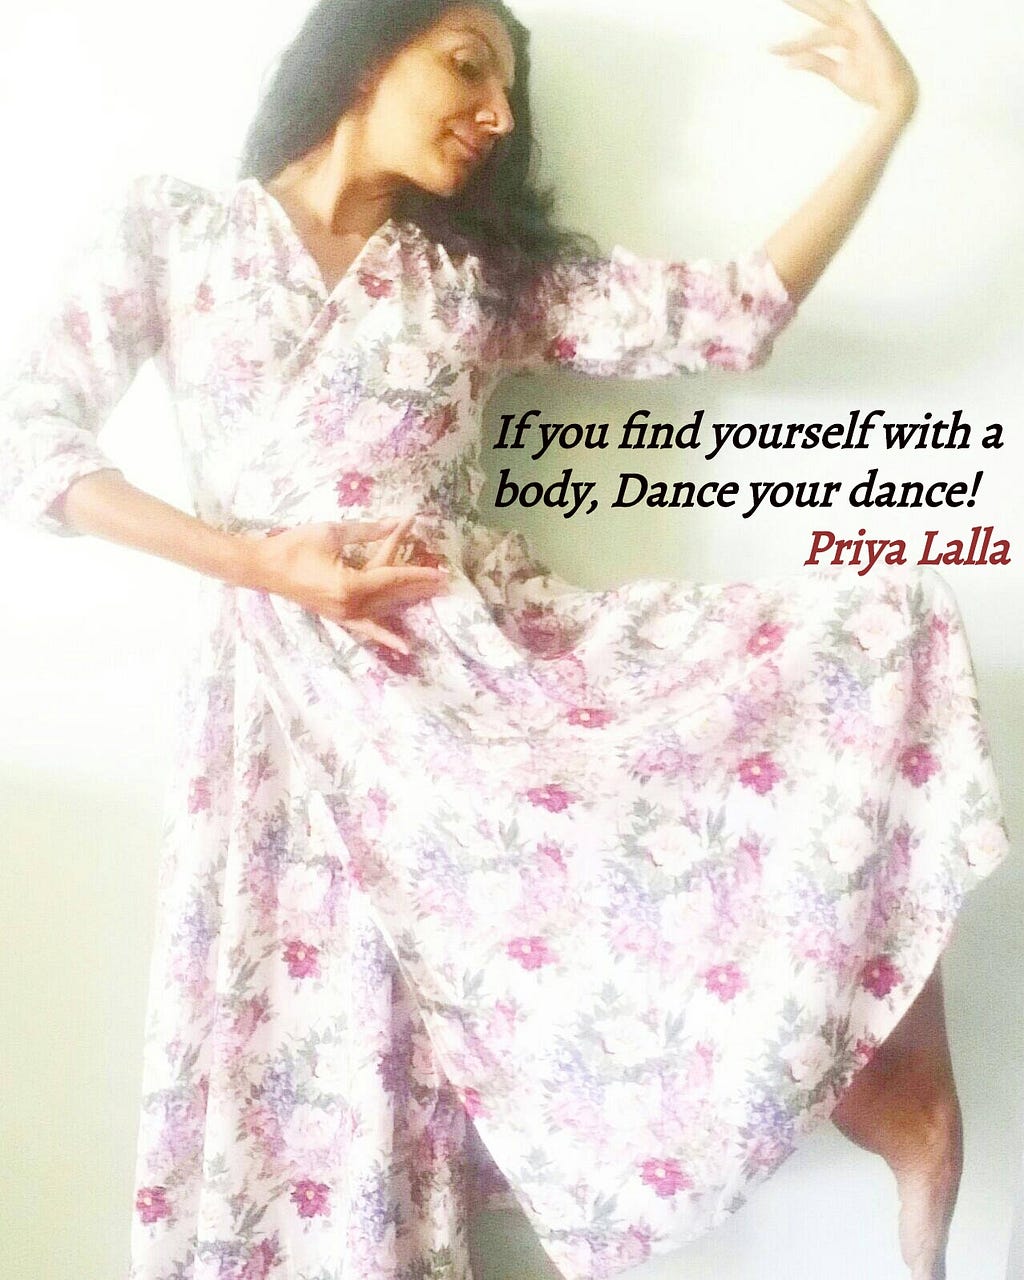 Me wearing a white dress with purple flowers doing a dance pose and my quote saying “If you find yourself with a body, dance your dance!”